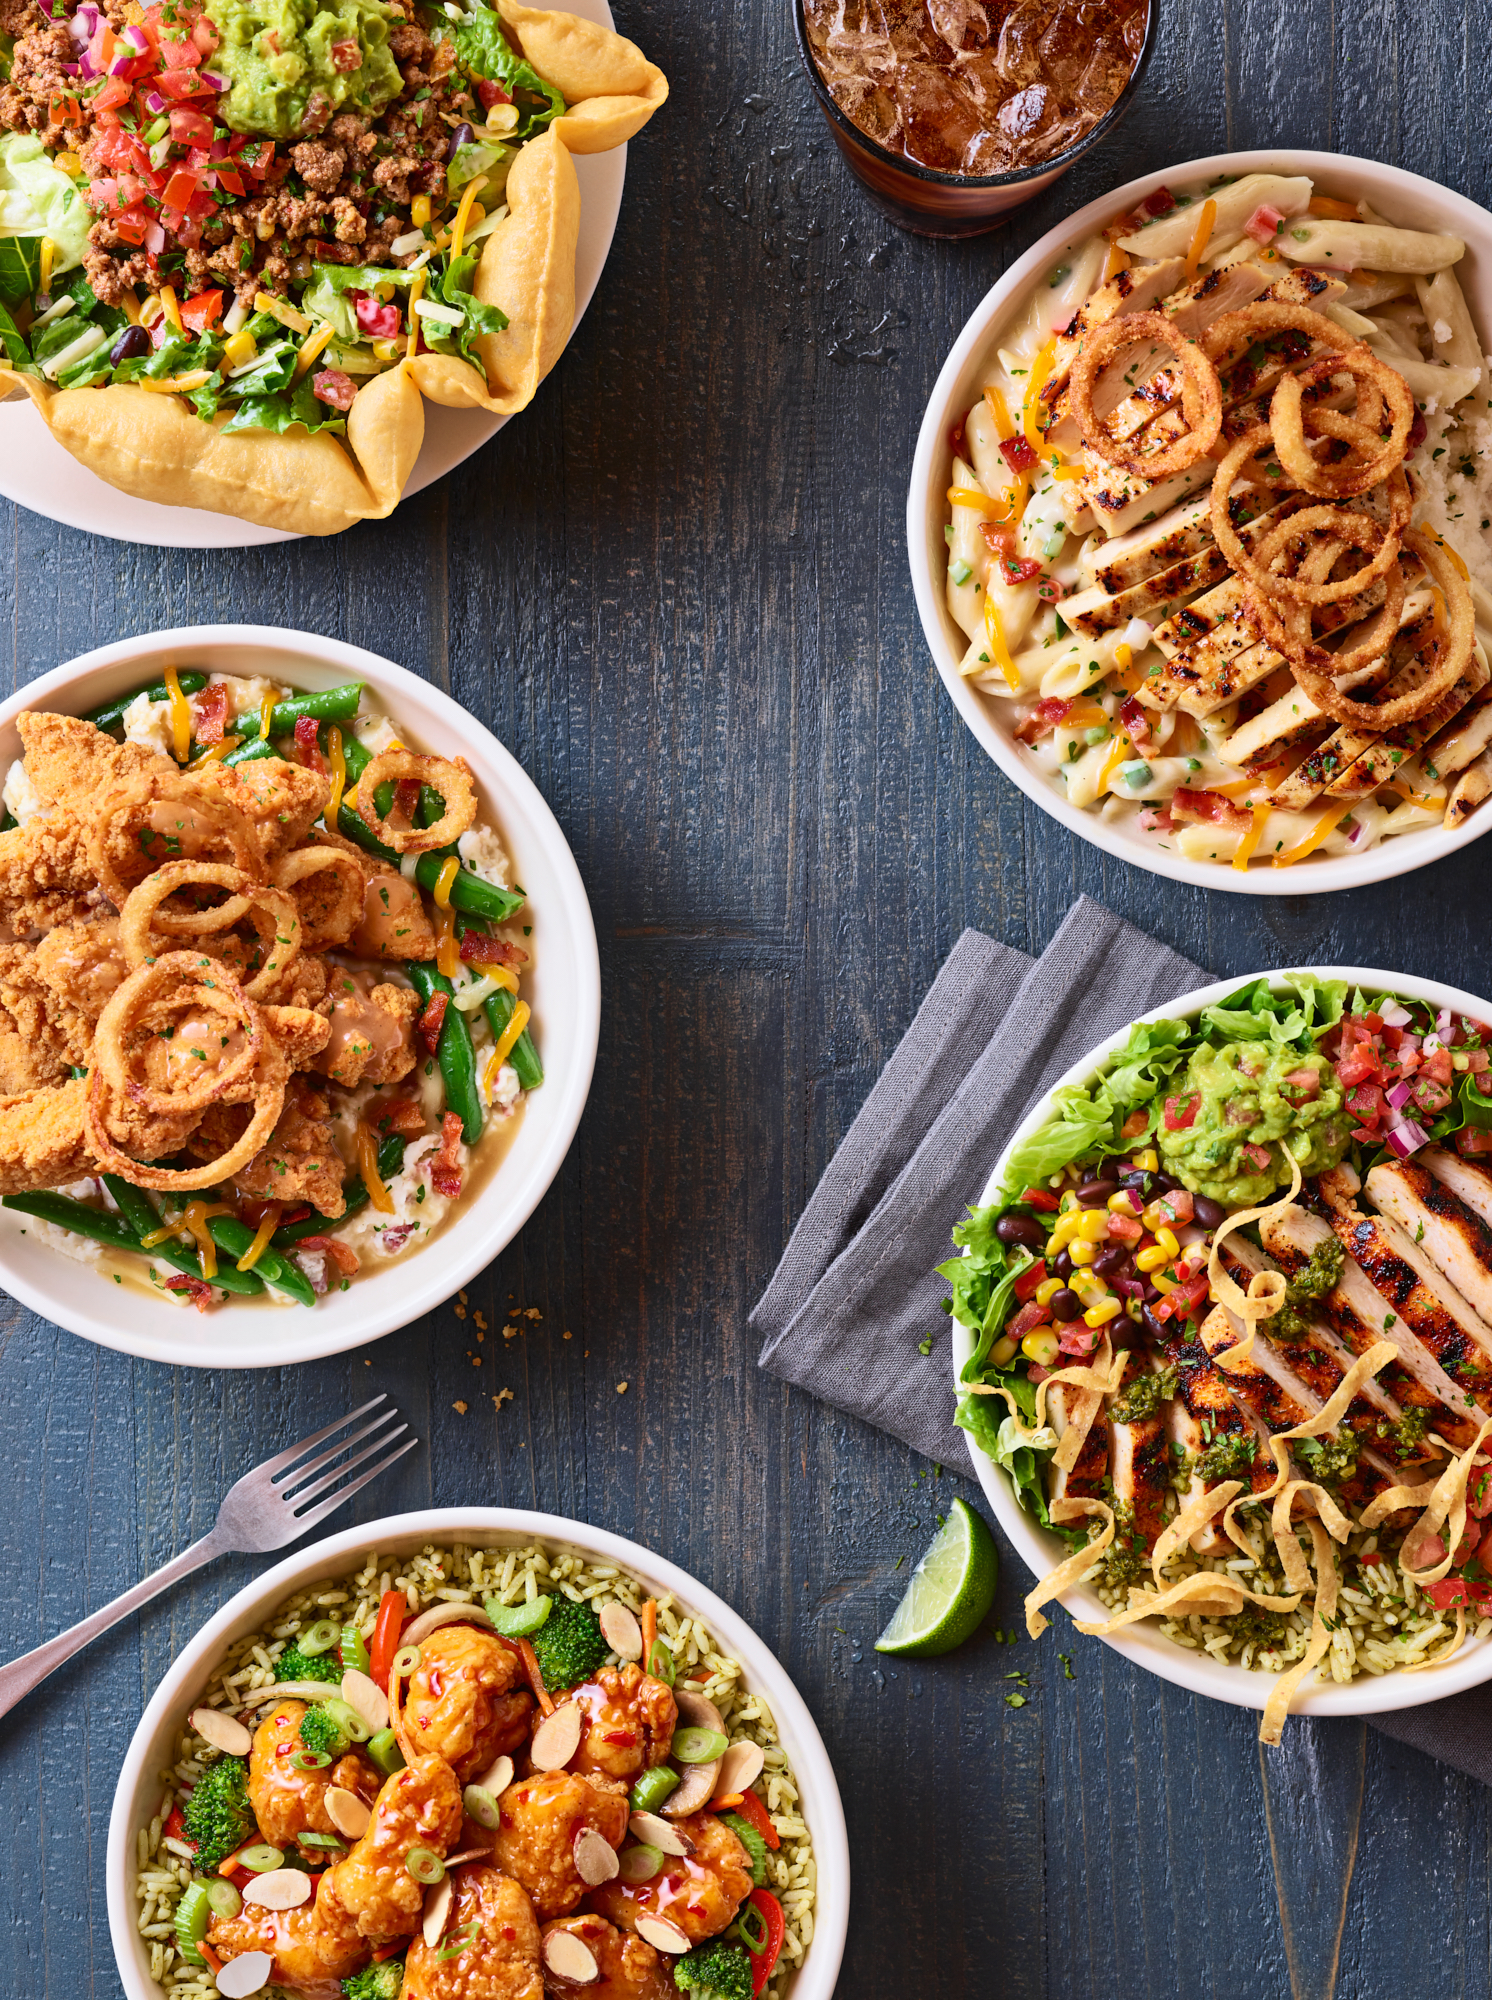 Applebee's delicious food photography of grilled chicken bowls by Los Angeles commercial photographer Vinnie Finn | SternRep